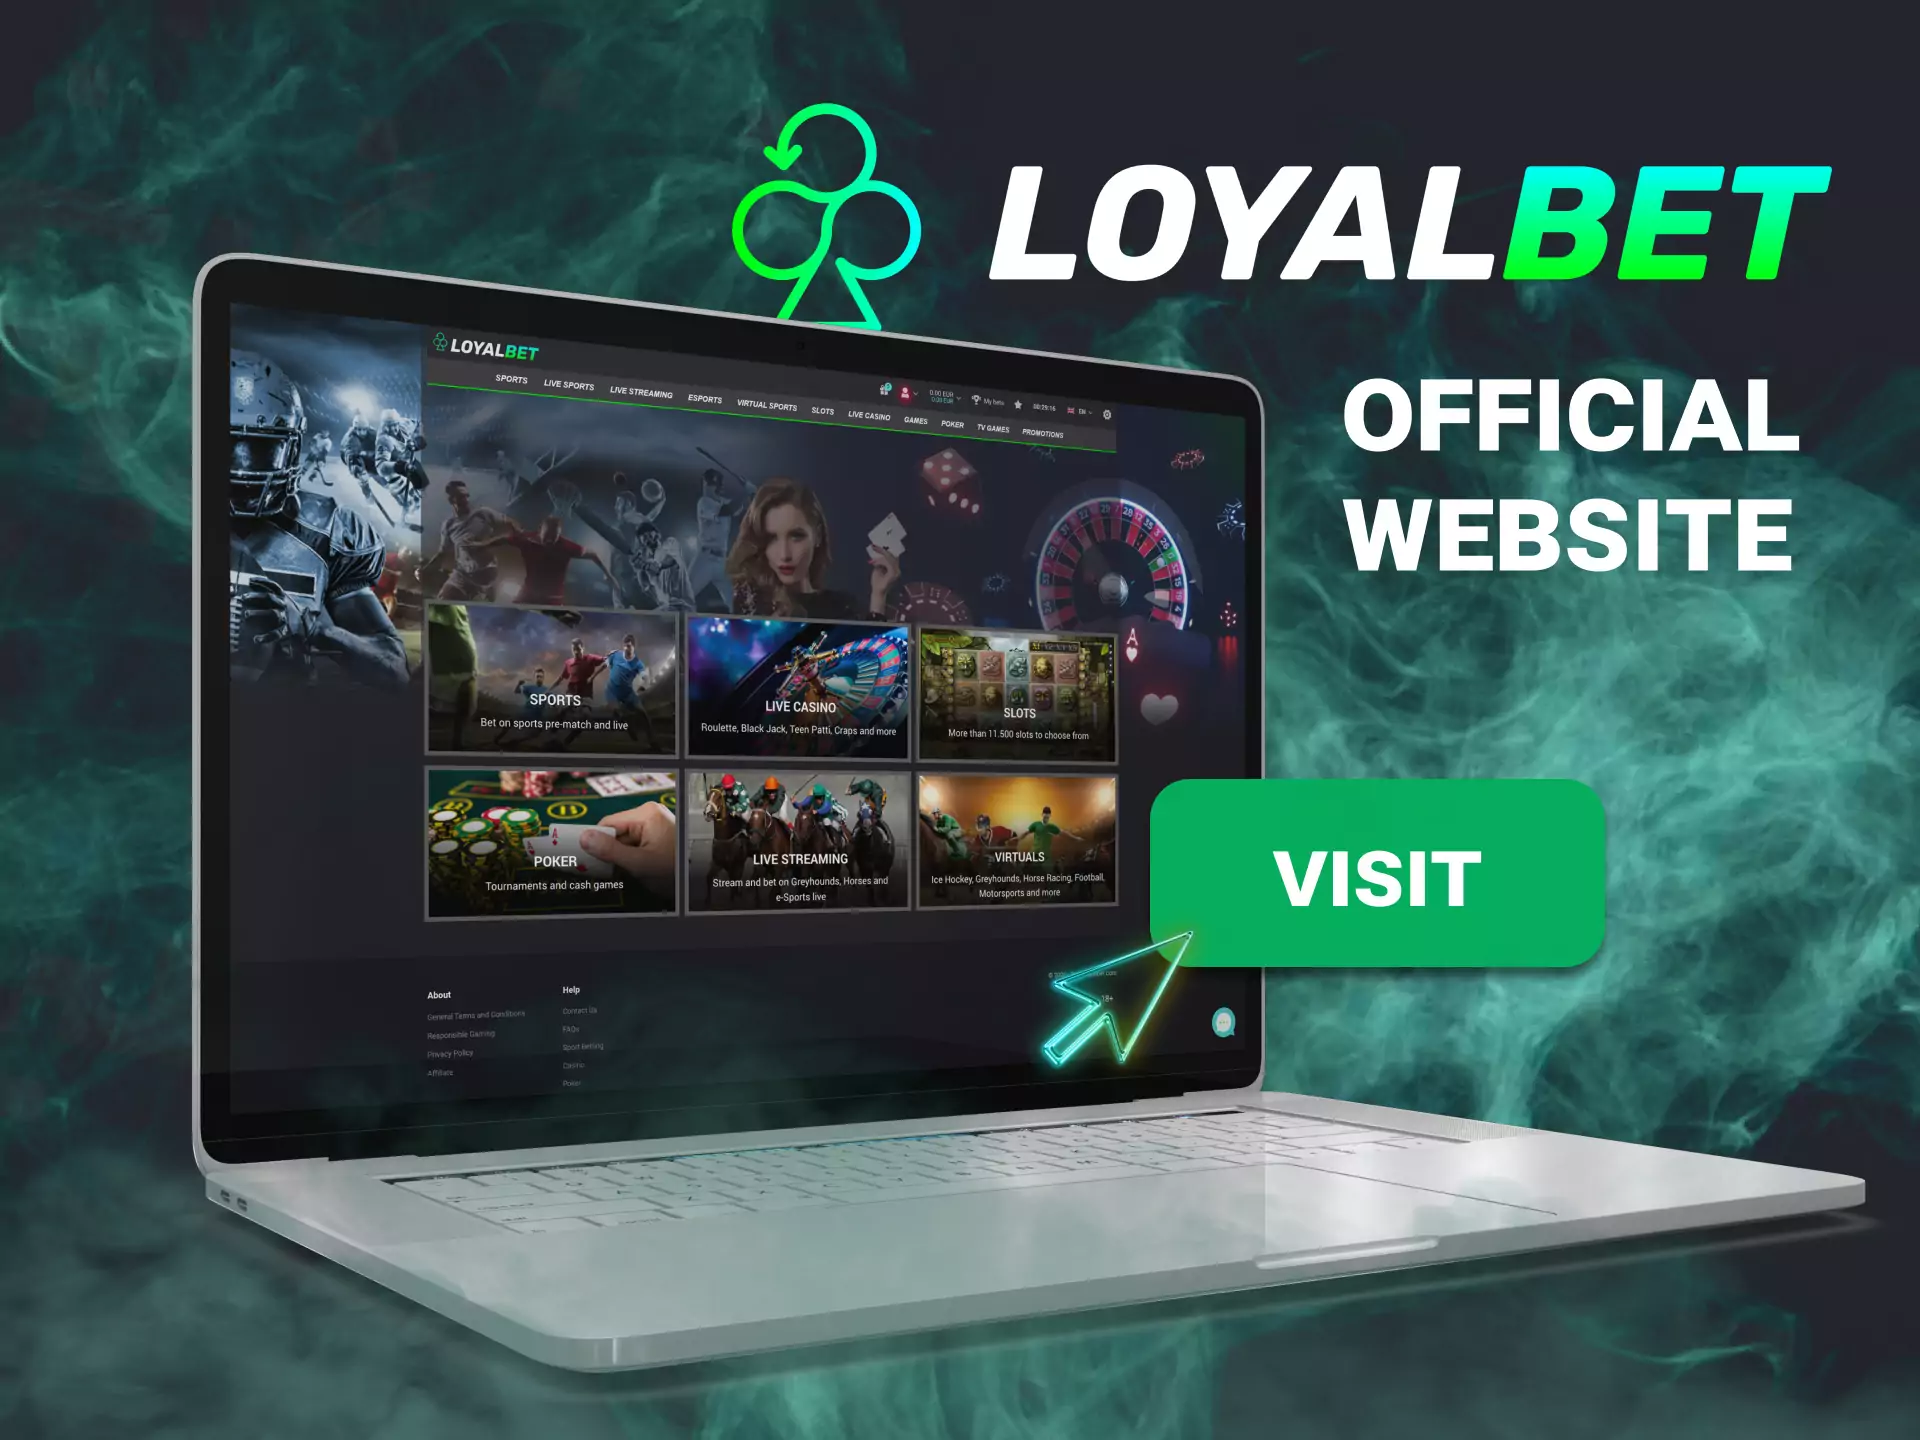 The official website of Loyalbet works great on PC browsers.